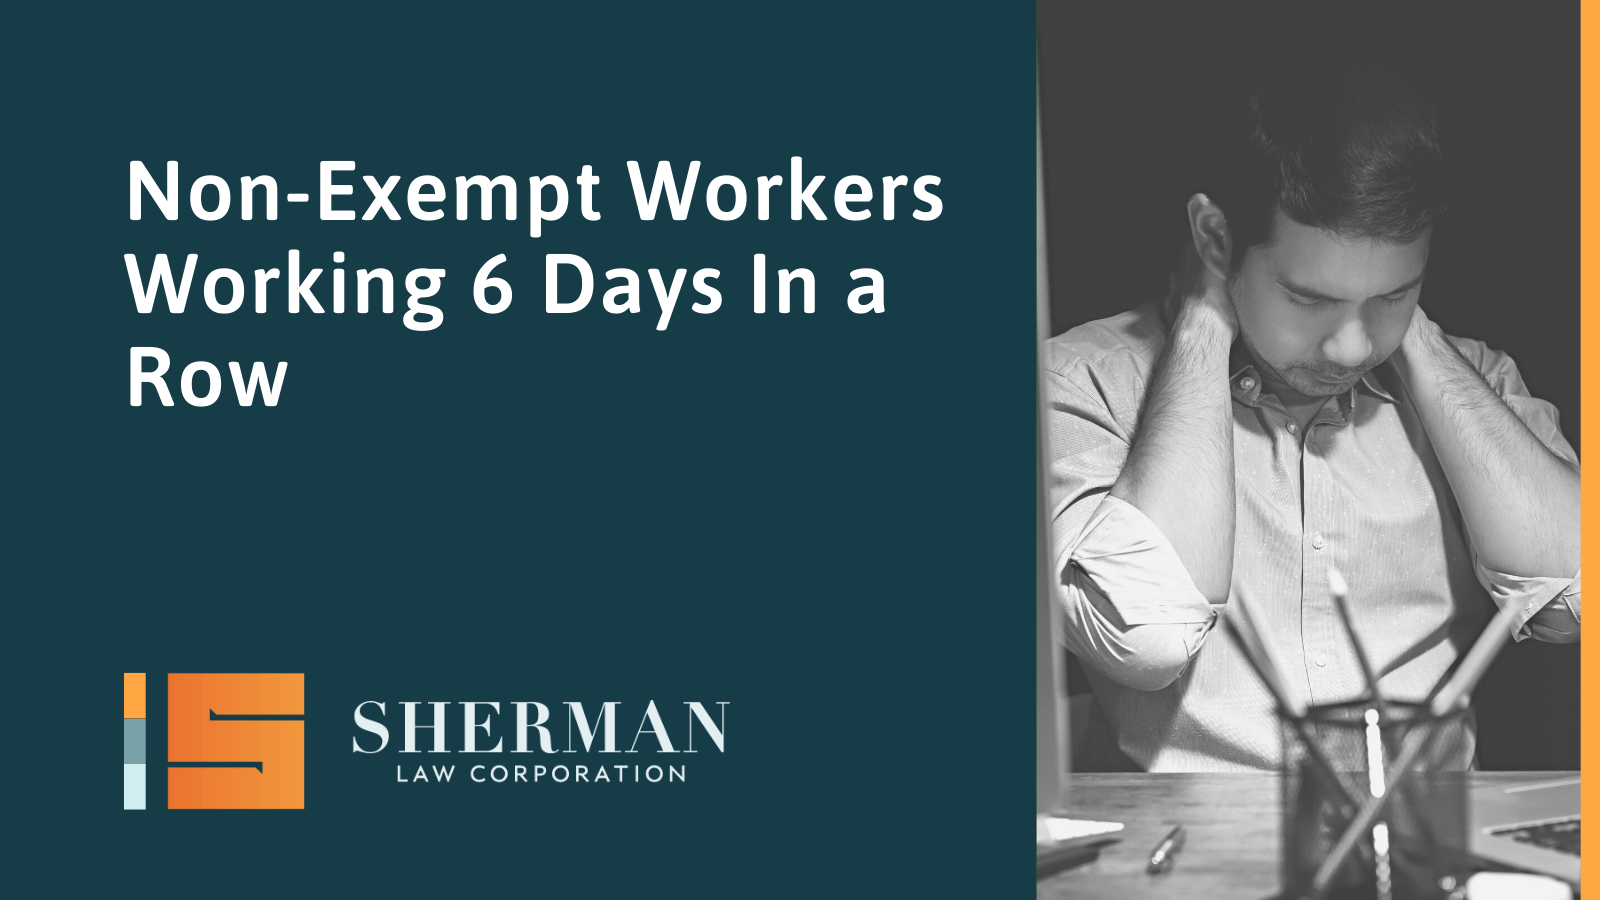 Non-Exempt Workers Working 6 Days In a Row - sherman law corporation